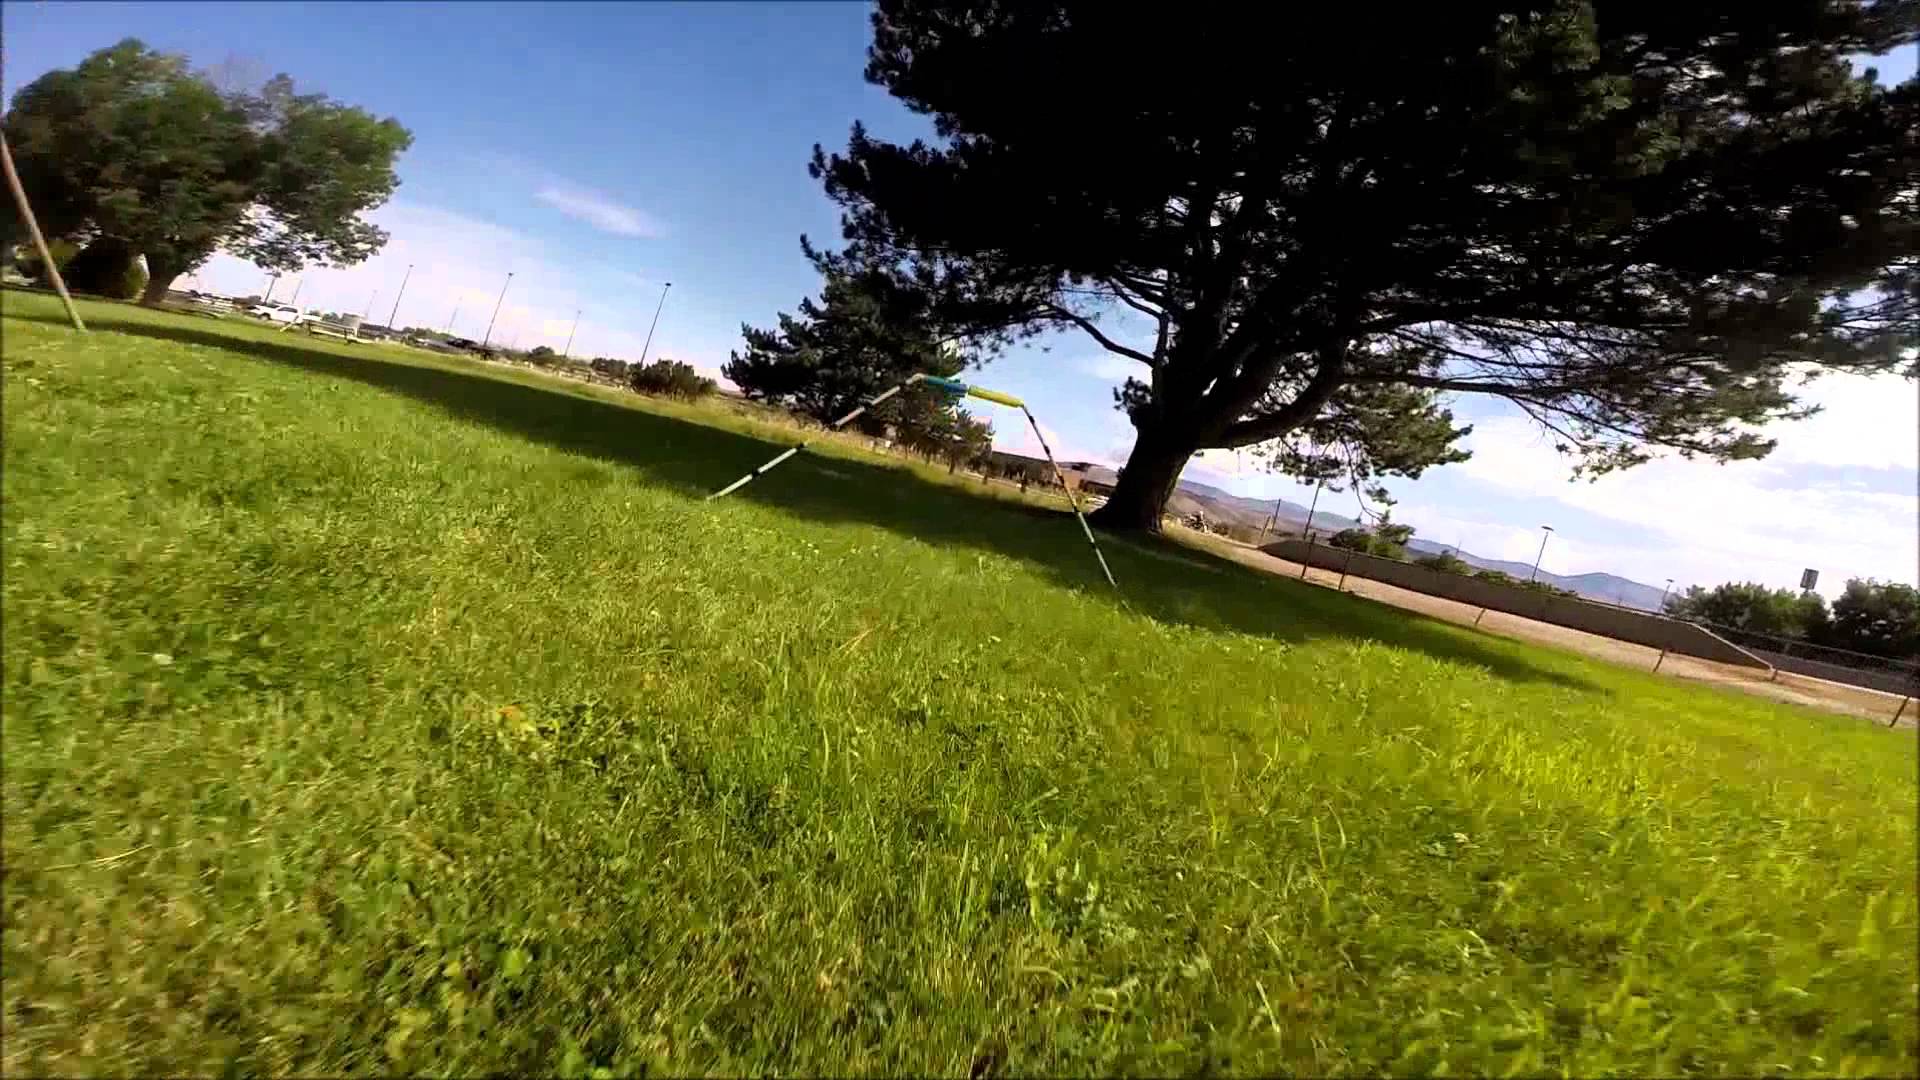 Drone Racing Hot Laps / Hovership Zuul / Boise FPV